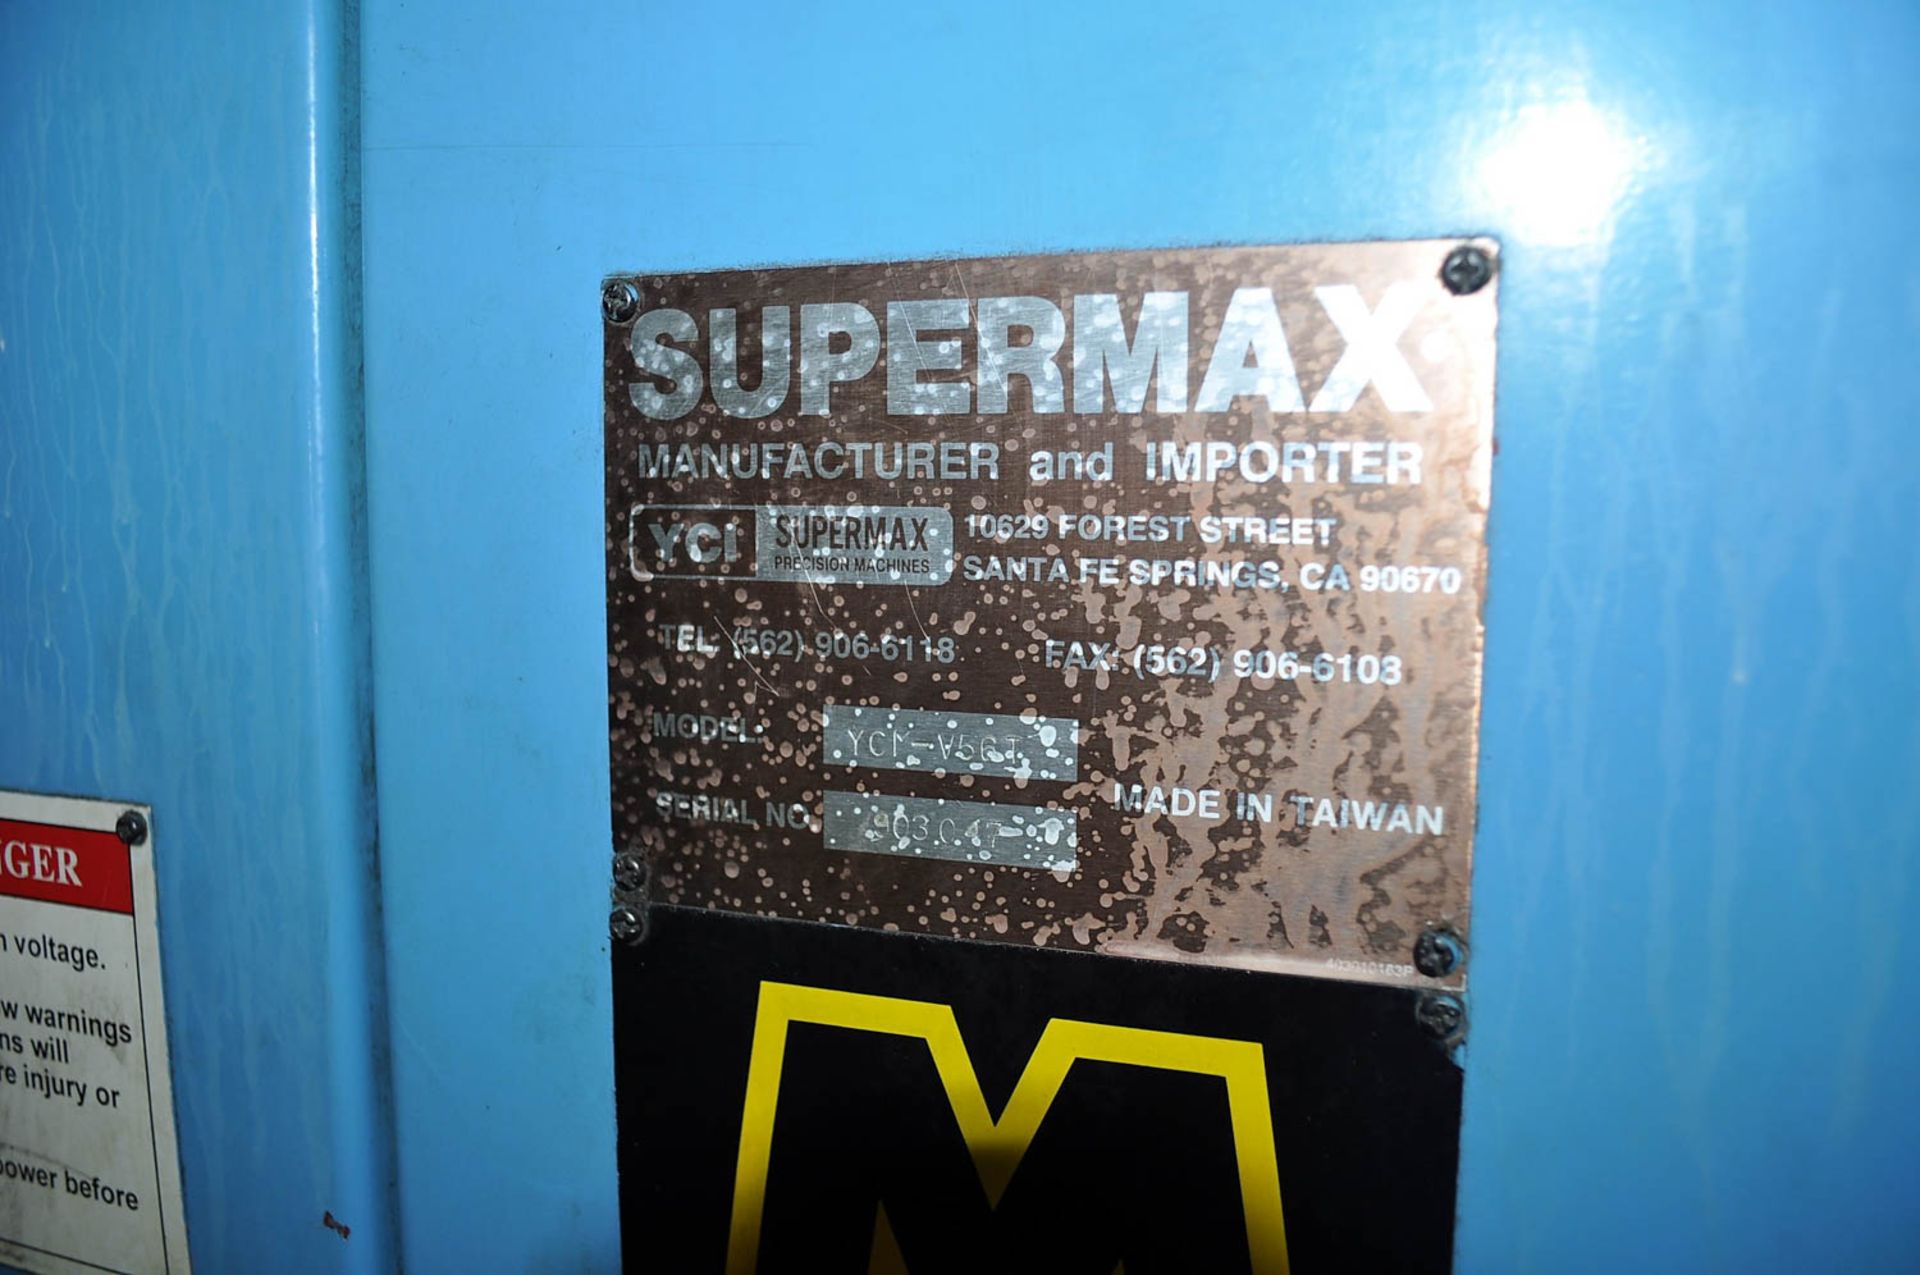 SUPERMAX MDL. V56T CNC VERTICAL MACHINING CENTER, TRAVELS: X-22", Y-16", Z-20", WITH 16-POSITION - Image 5 of 5